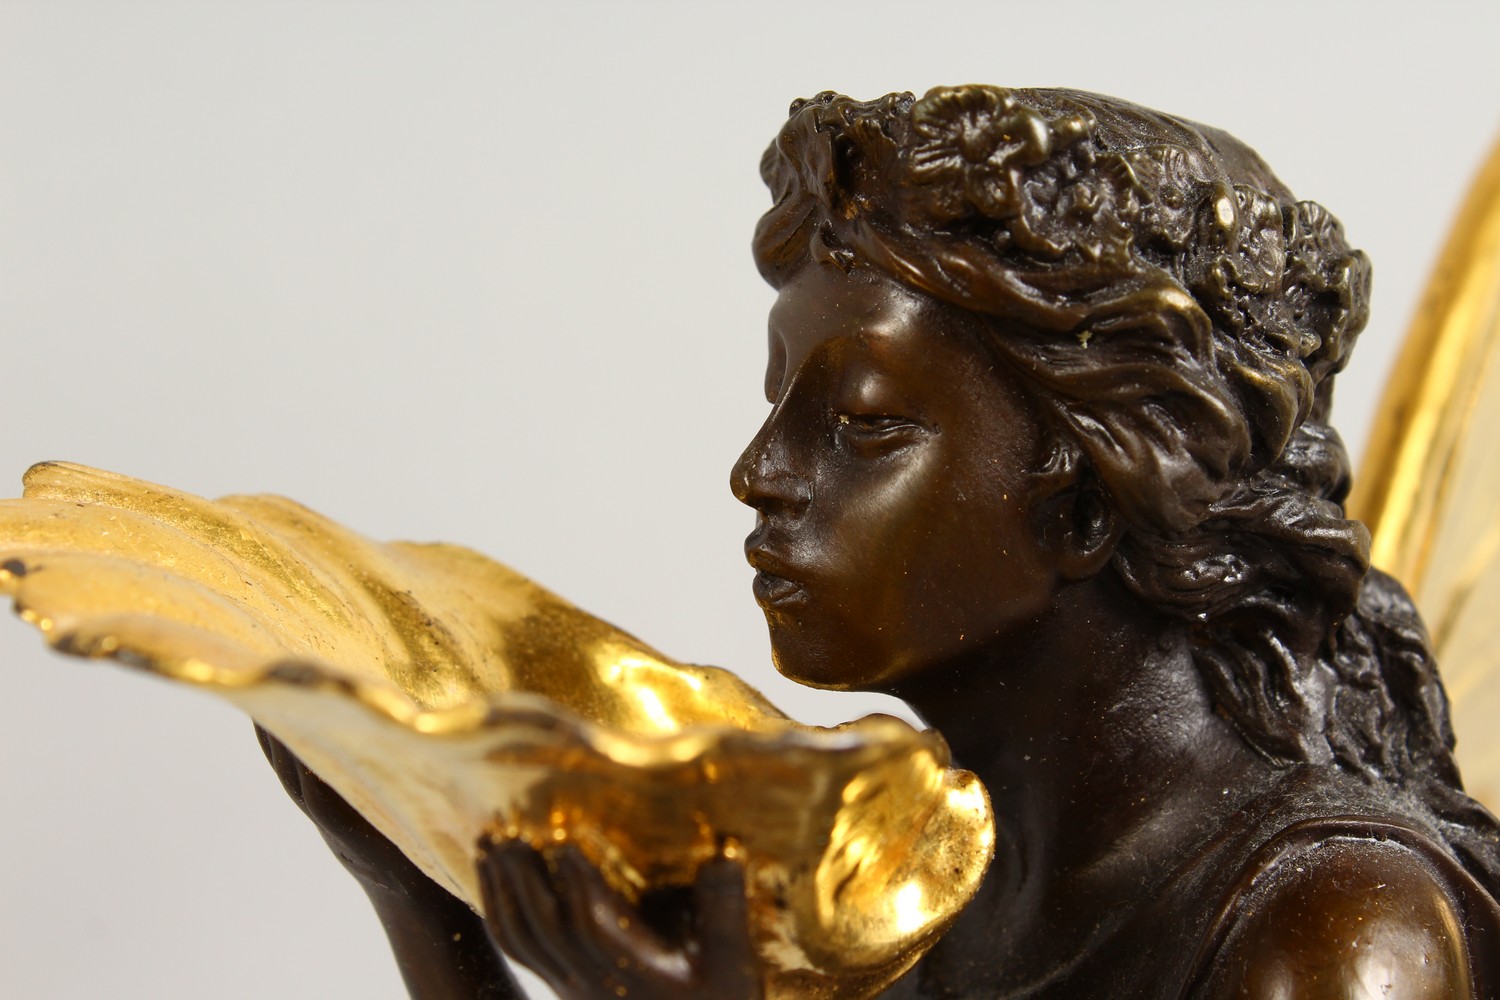 A BRONZE FIGURE OF A FAIRY, 20TH CENTURY, standing holding a shell in her hands, on a marble base. - Image 4 of 9